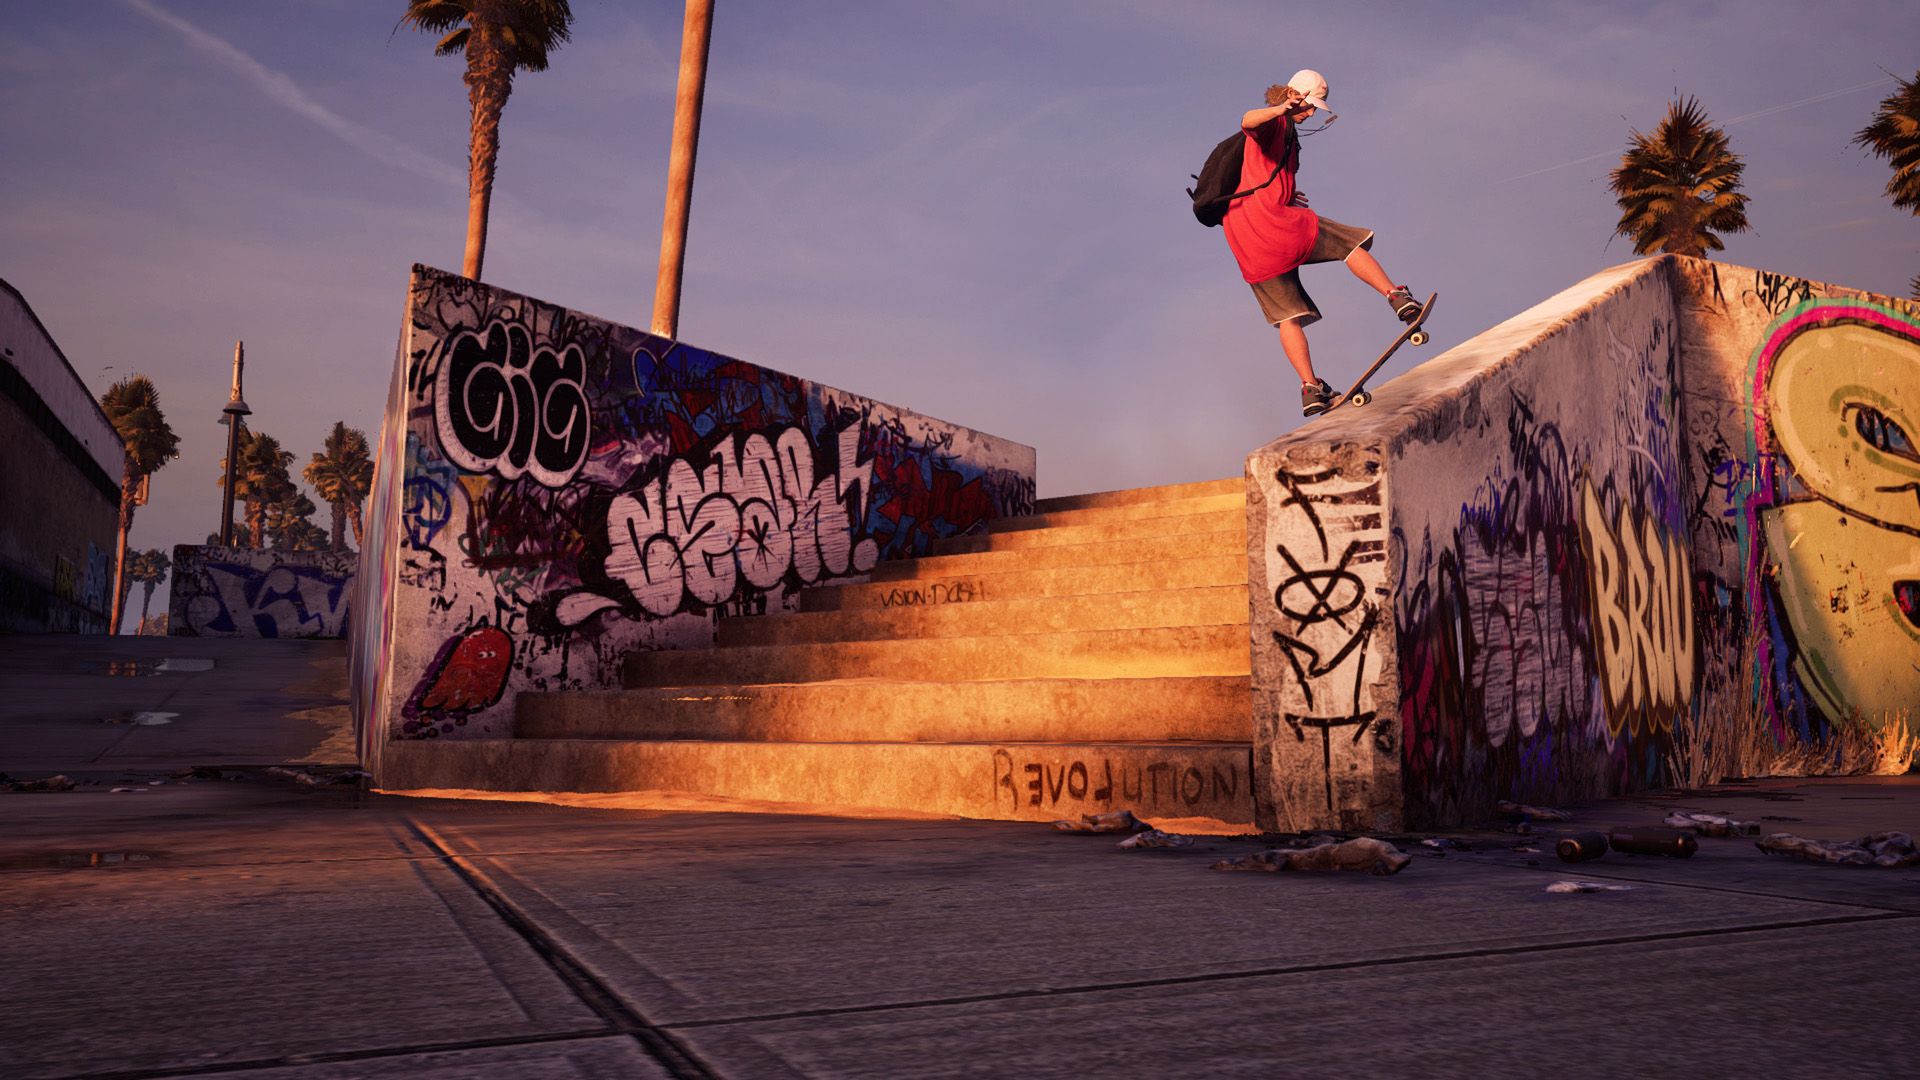 Tony Hawk's Pro Skater 1 + 2 initial review: Hang time with the remastered collection photo 7